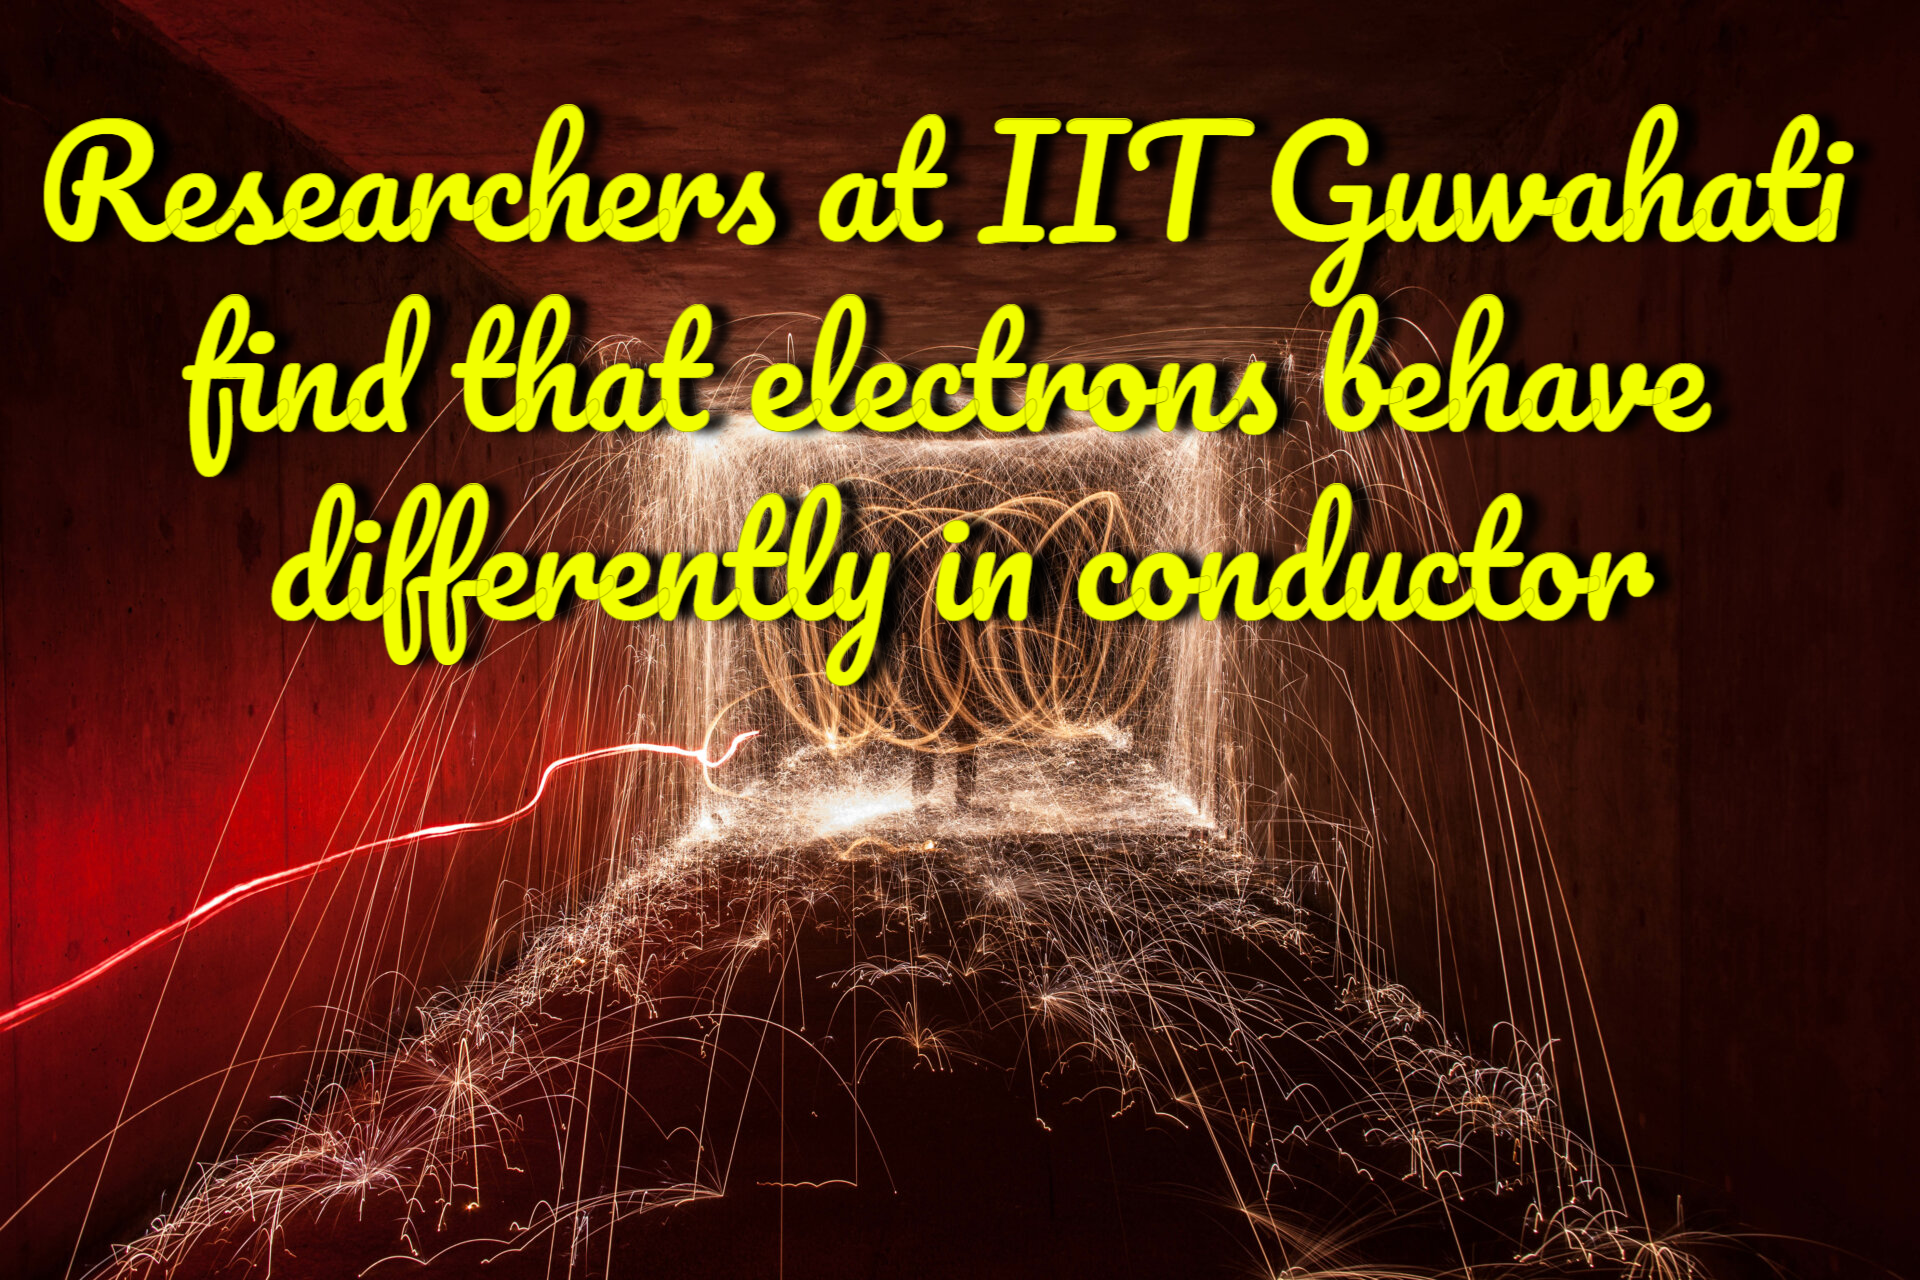 A study at IIT Guwahati has found that electrons in conductors have a novel behavior